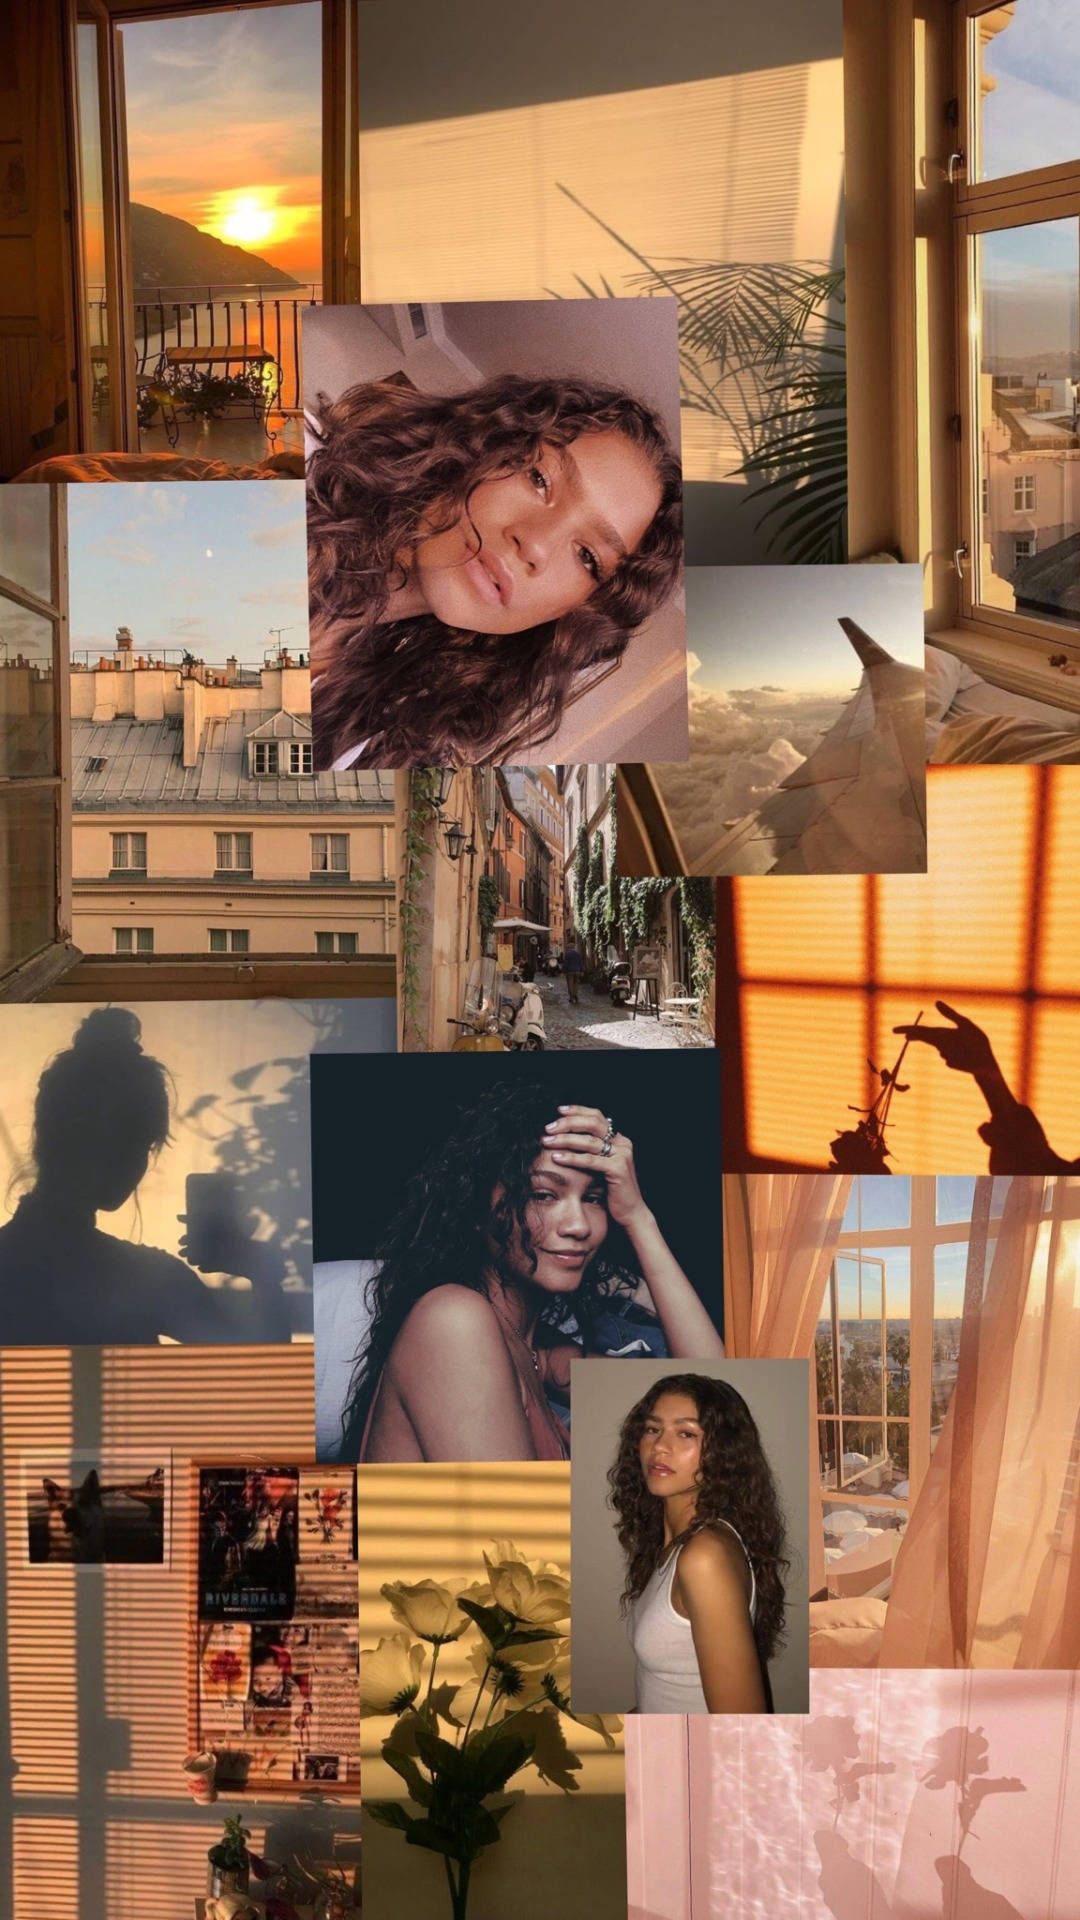 Aesthetic collage with photos of a woman, a sunset, a cityscape, and a room with a window. - Zendaya